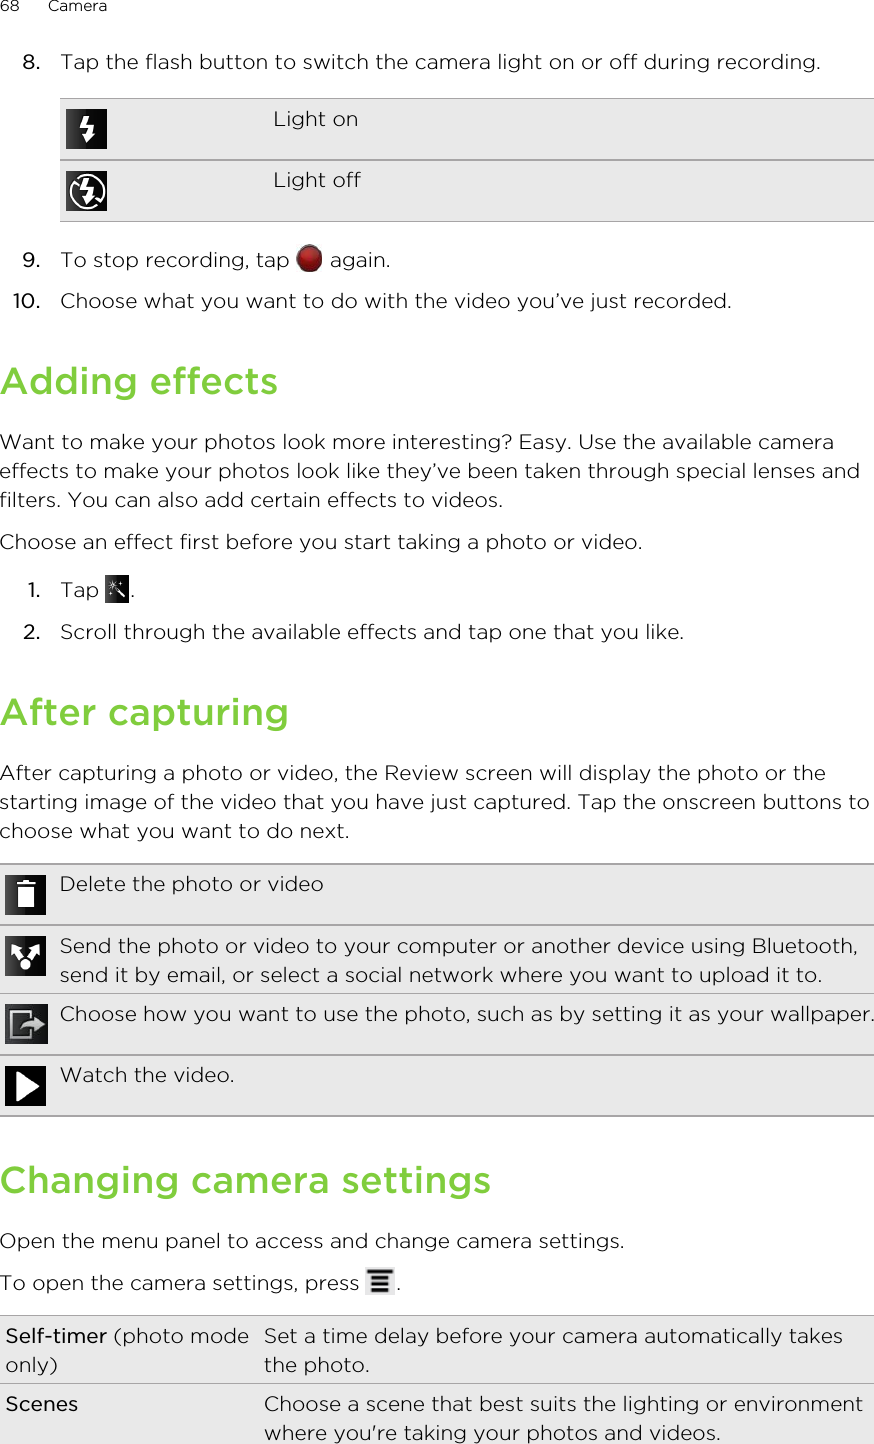 8. Tap the flash button to switch the camera light on or off during recording.Light onLight off9. To stop recording, tap   again.10. Choose what you want to do with the video you’ve just recorded.Adding effectsWant to make your photos look more interesting? Easy. Use the available cameraeffects to make your photos look like they’ve been taken through special lenses andfilters. You can also add certain effects to videos.Choose an effect first before you start taking a photo or video.1. Tap  .2. Scroll through the available effects and tap one that you like.After capturingAfter capturing a photo or video, the Review screen will display the photo or thestarting image of the video that you have just captured. Tap the onscreen buttons tochoose what you want to do next.Delete the photo or videoSend the photo or video to your computer or another device using Bluetooth,send it by email, or select a social network where you want to upload it to.Choose how you want to use the photo, such as by setting it as your wallpaper.Watch the video.Changing camera settingsOpen the menu panel to access and change camera settings.To open the camera settings, press  .Self-timer (photo modeonly)Set a time delay before your camera automatically takesthe photo.Scenes Choose a scene that best suits the lighting or environmentwhere you&apos;re taking your photos and videos.68 Camera